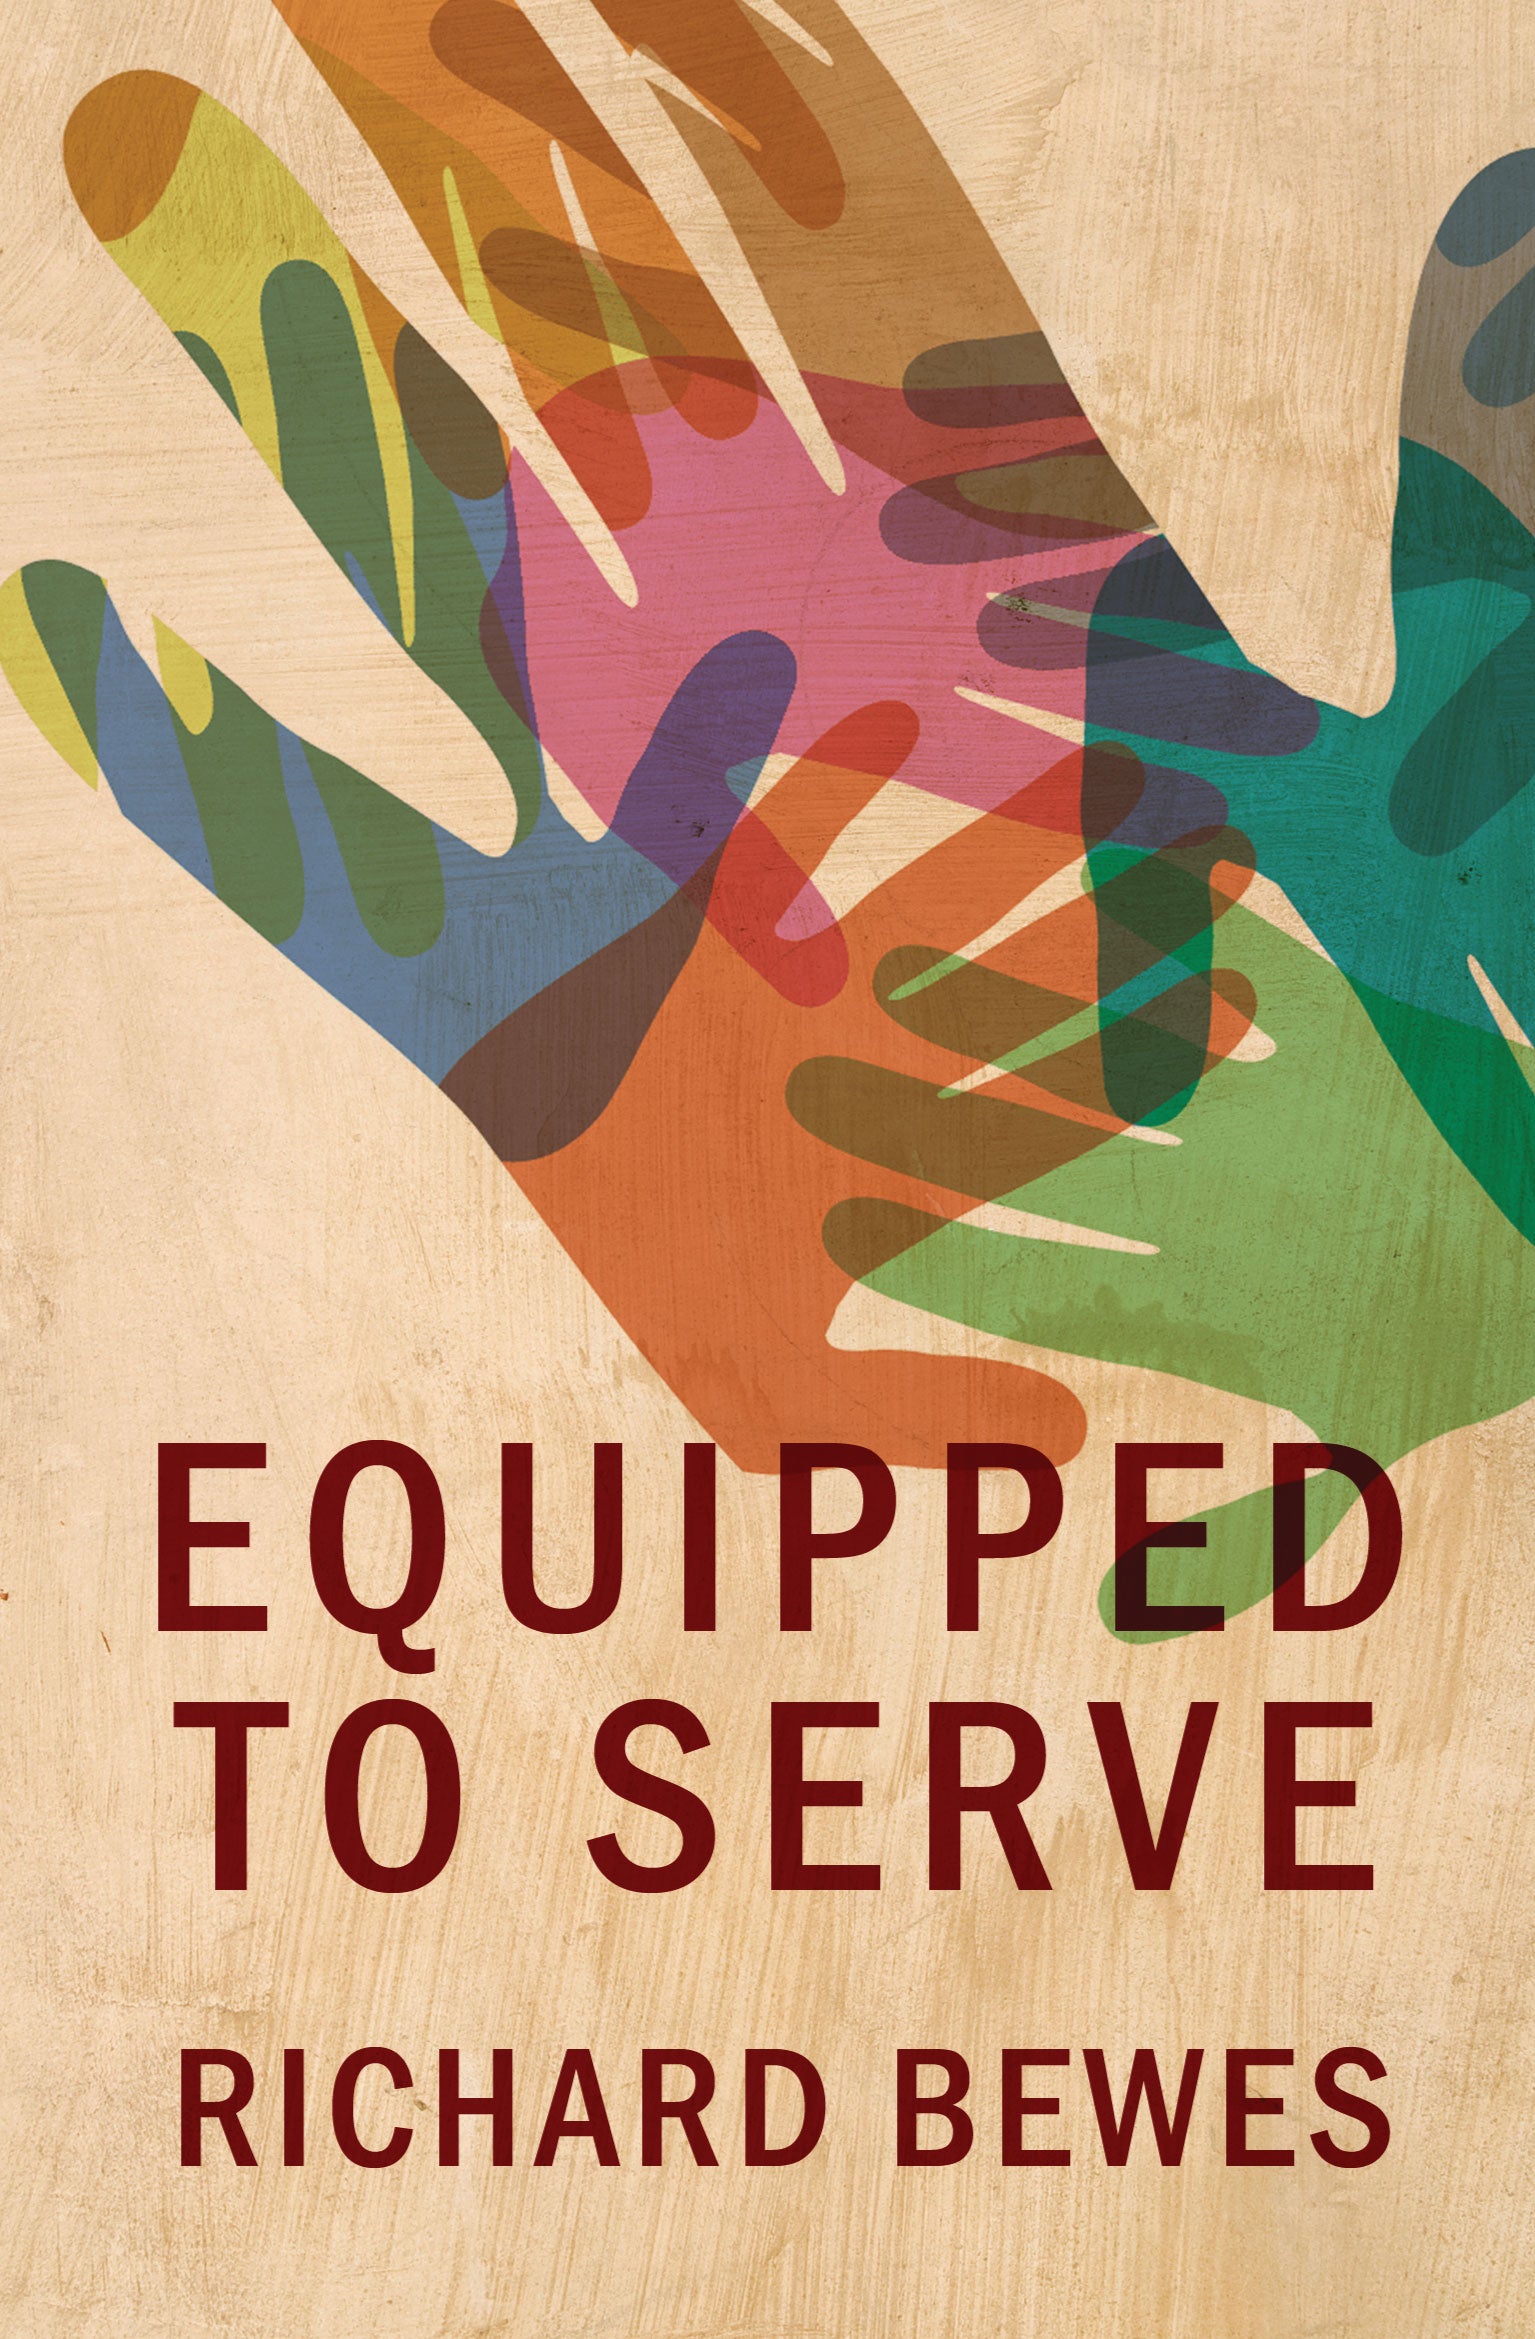 Image of Equipped to Serve other